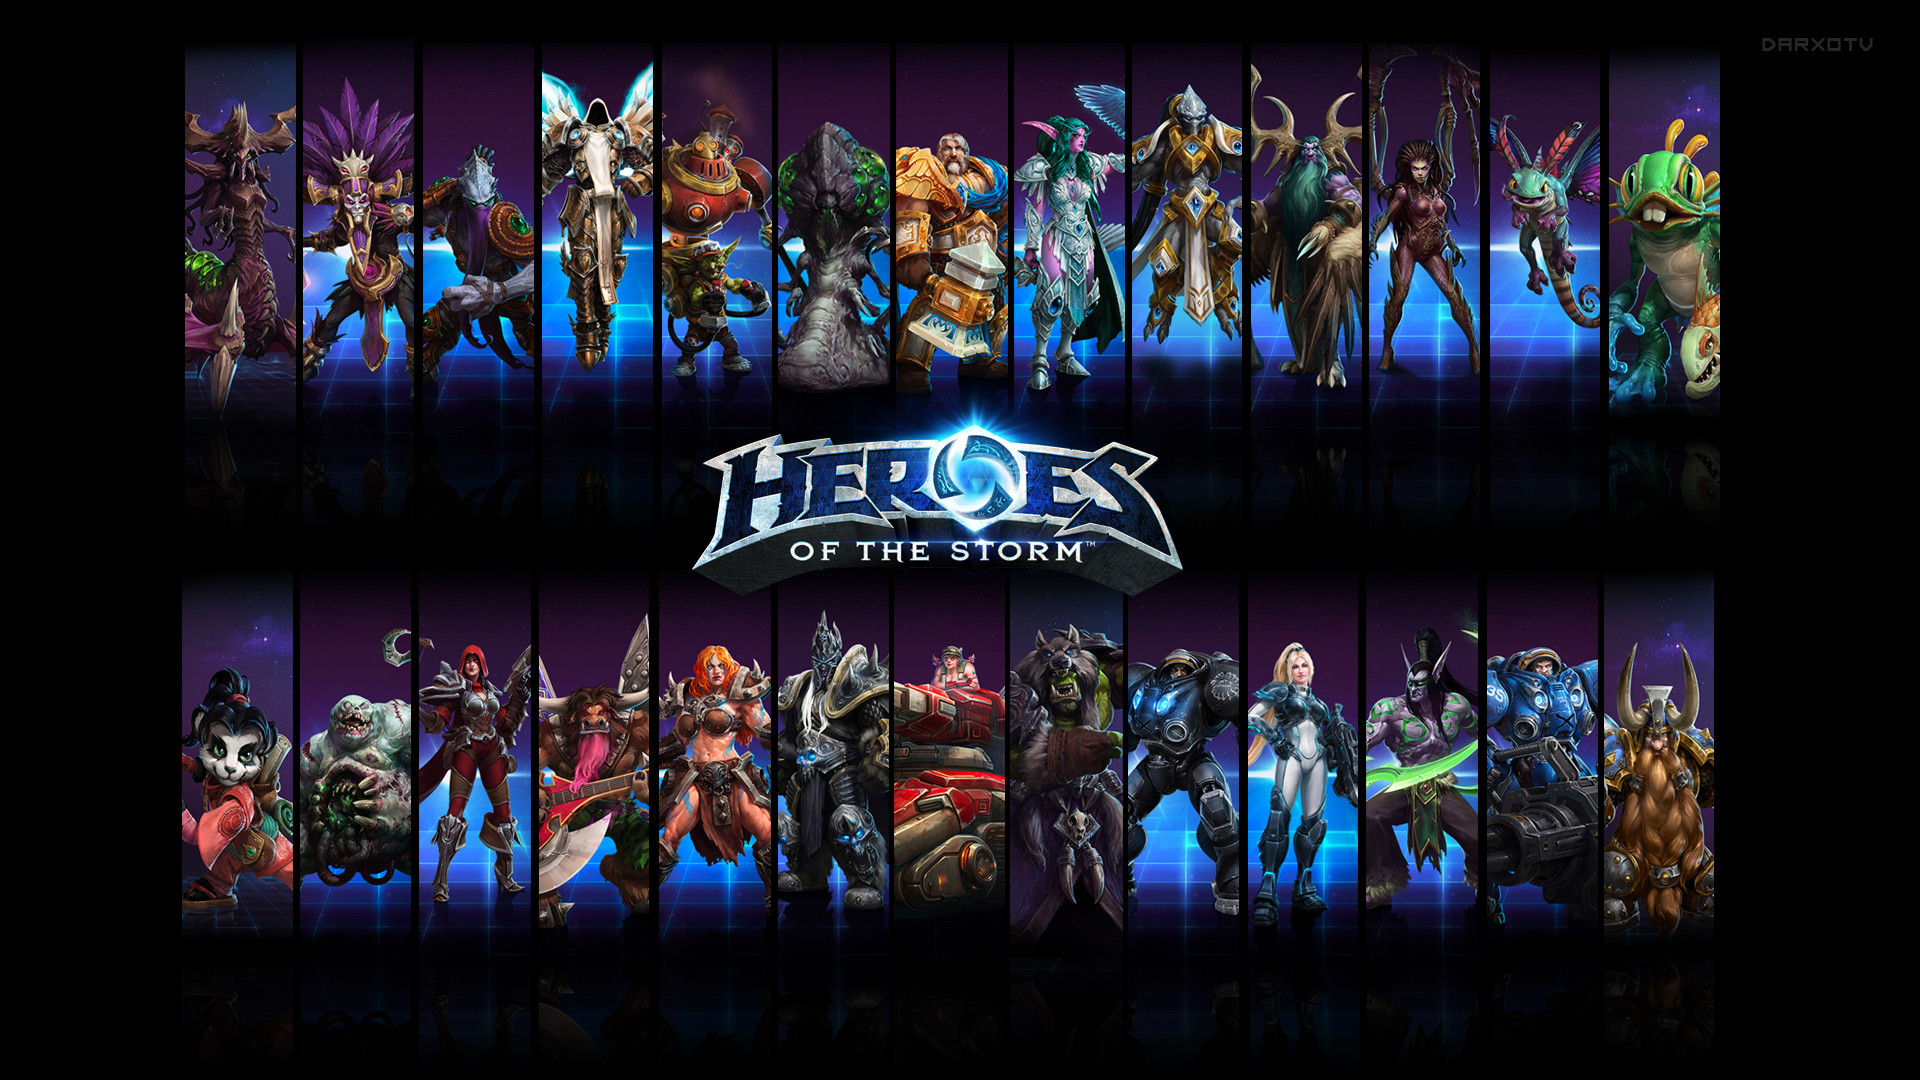 1920x1080 ... Heroes of The Storm - Heroes Wallpaper  by DarxoTV